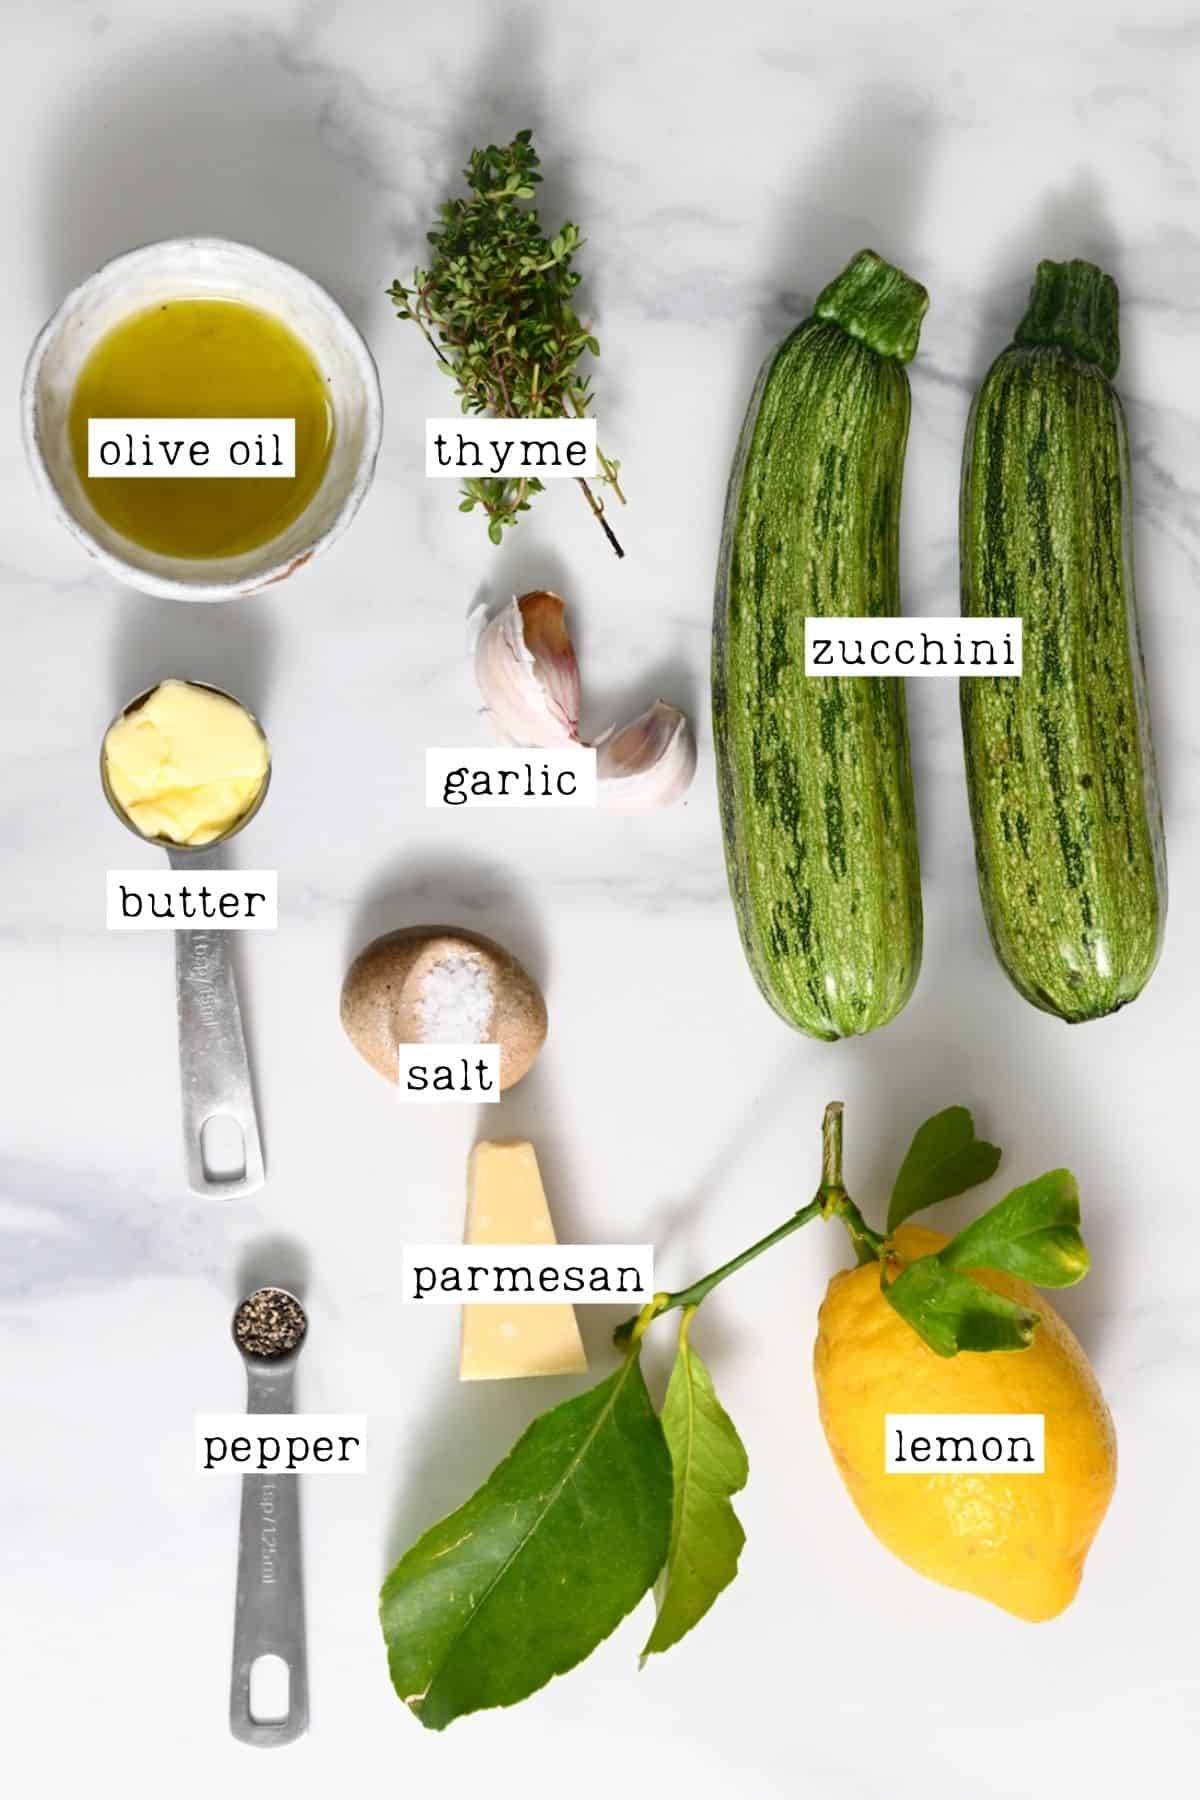 Ingredients for pan-fried zucchini